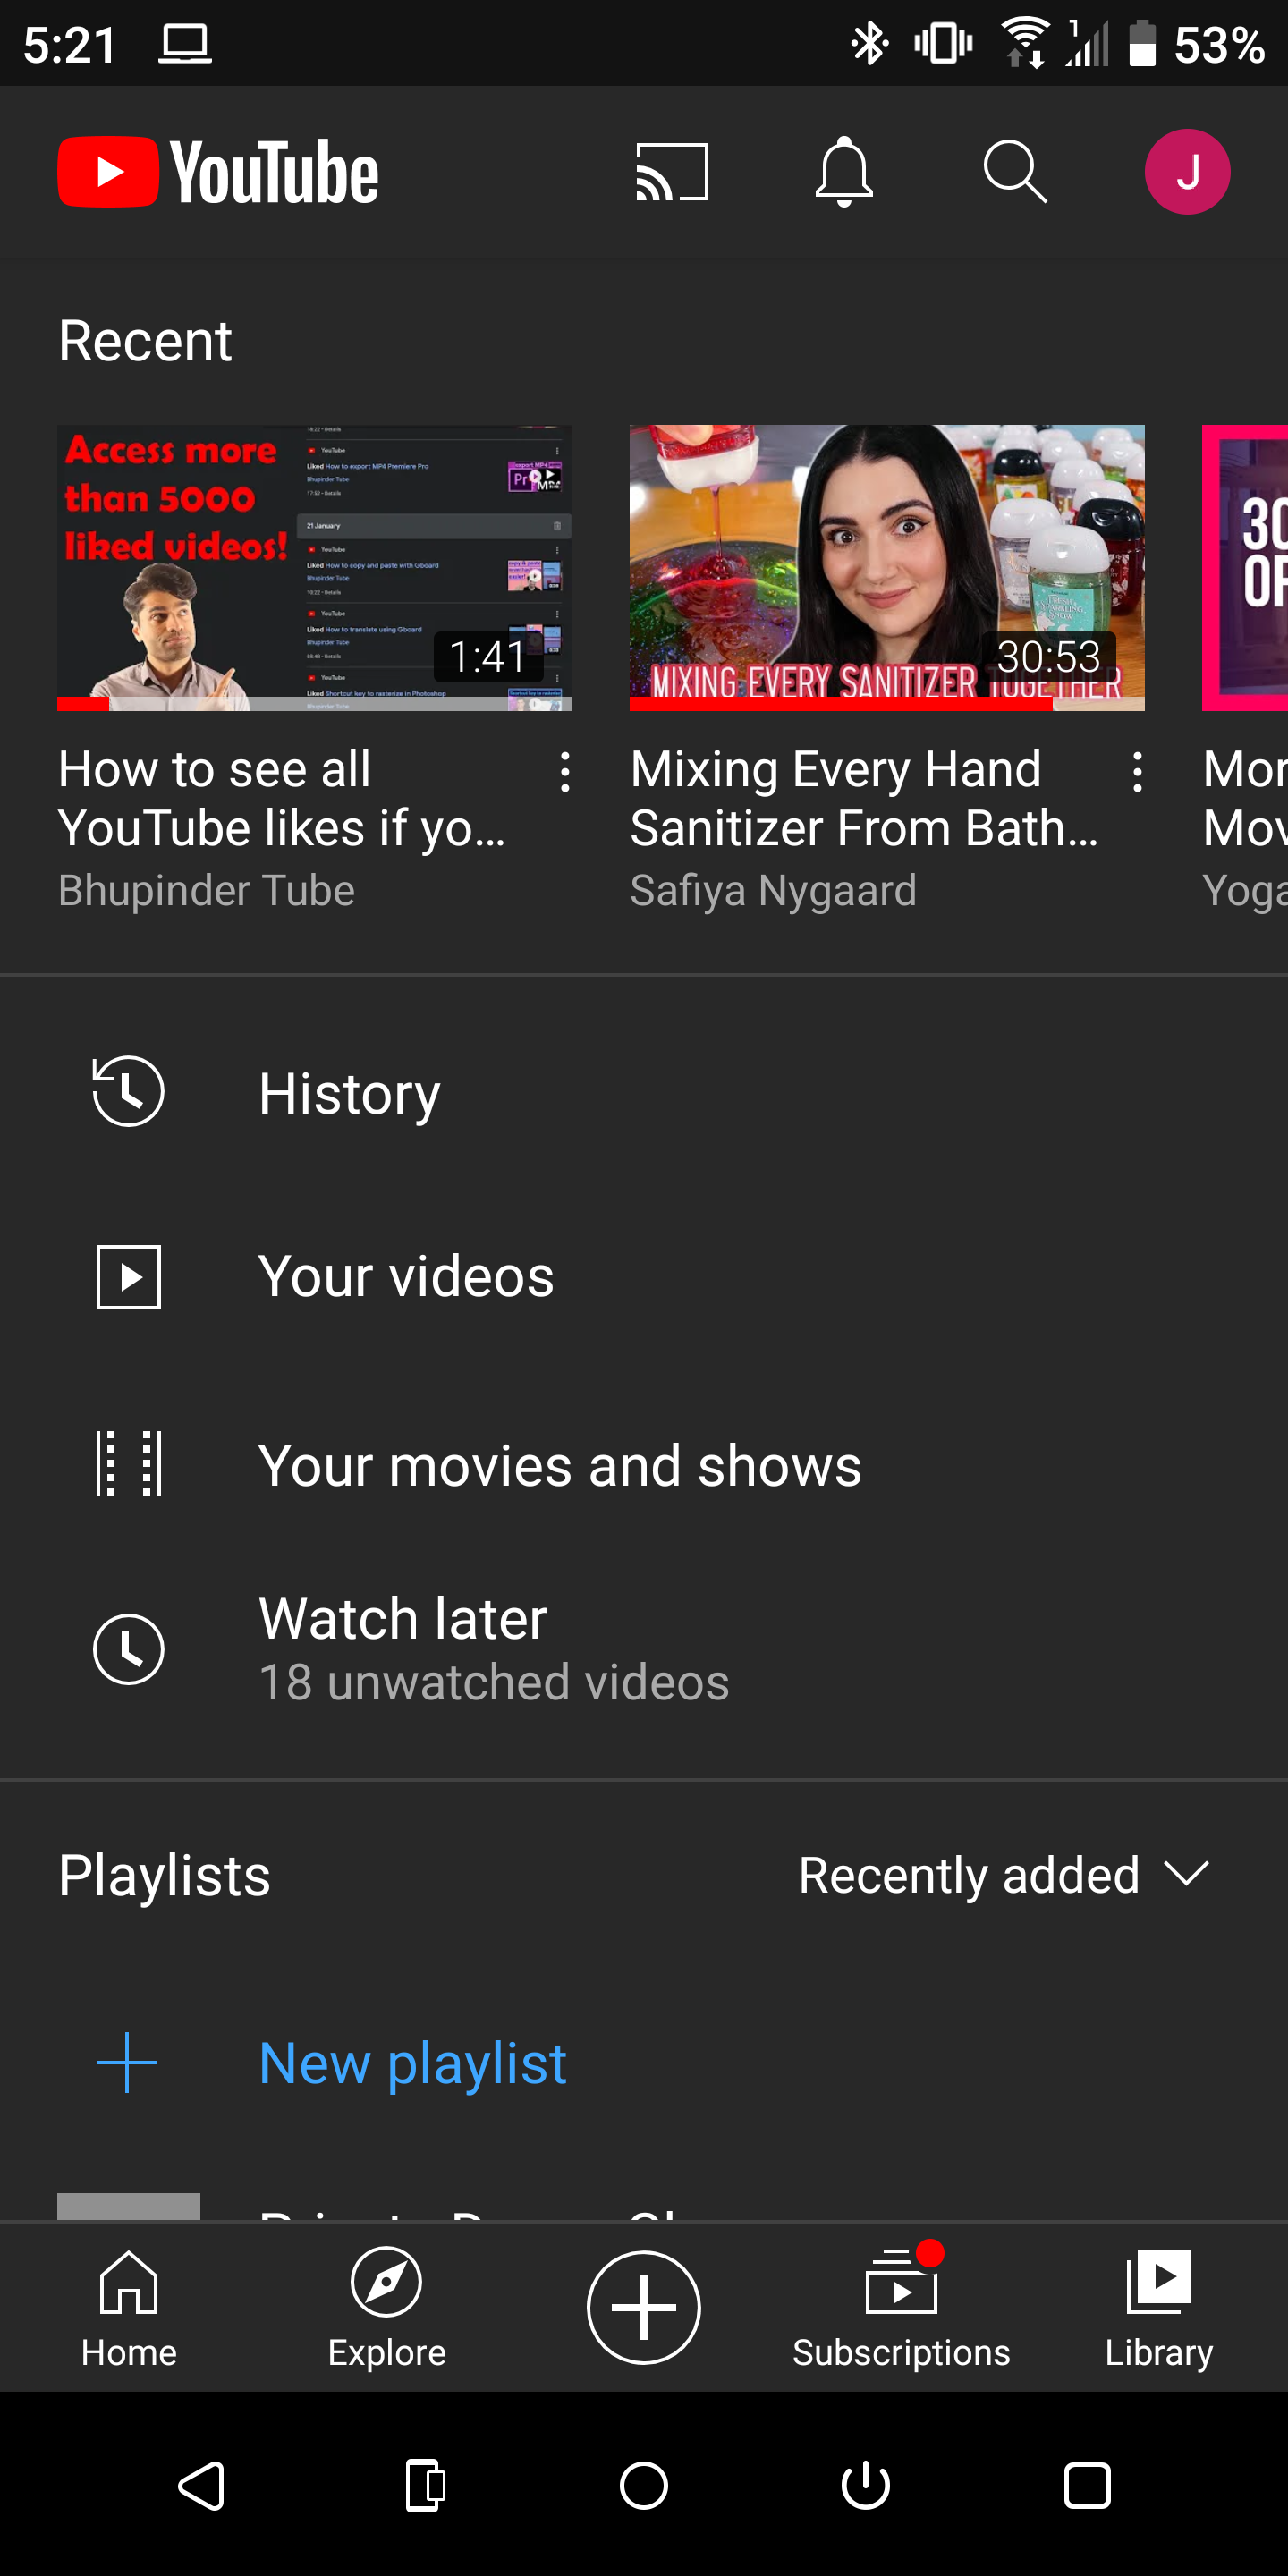 YouTube app library